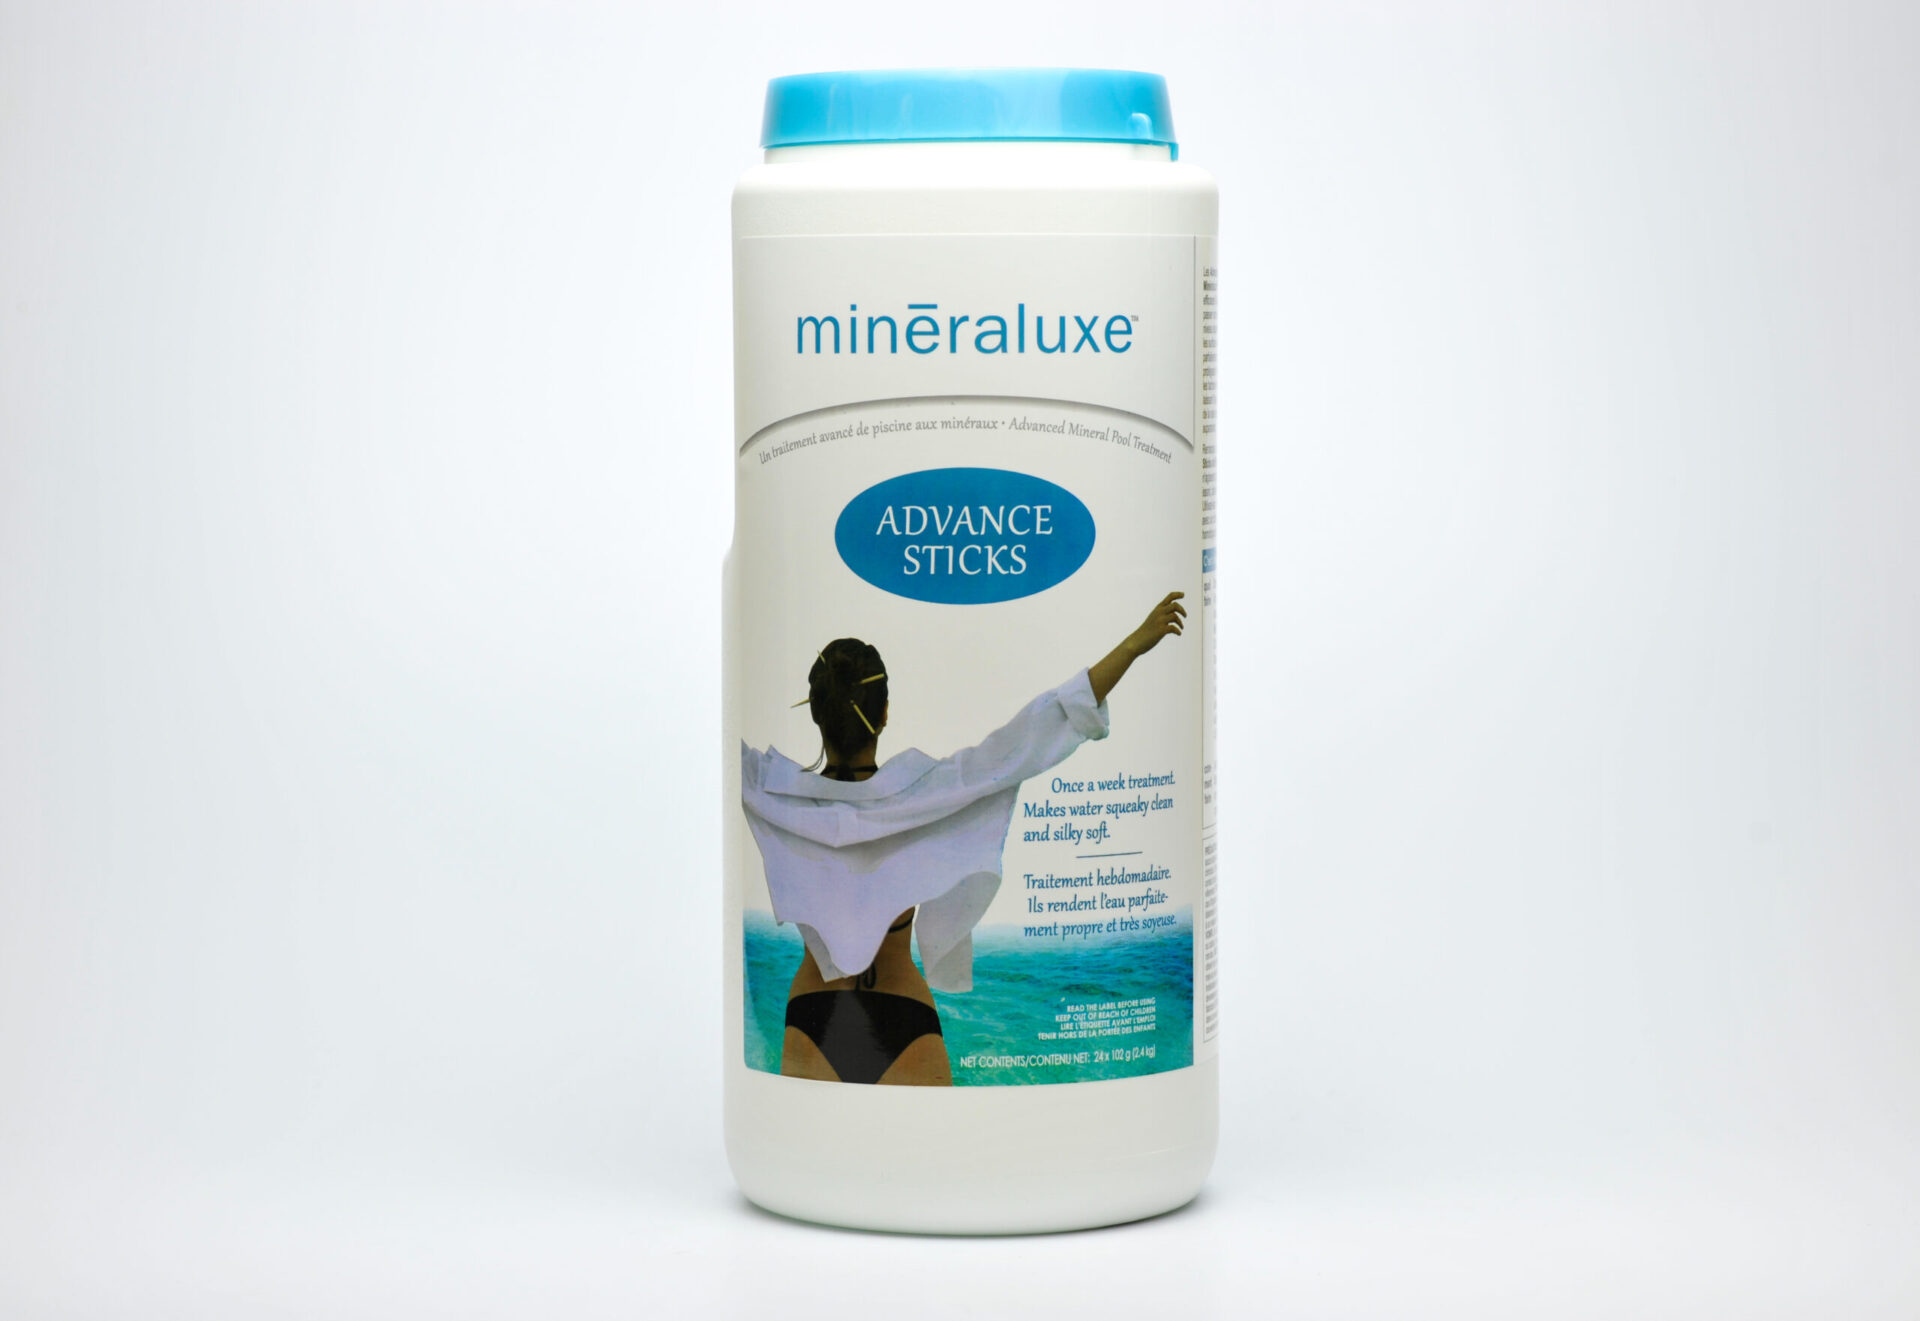 Mineraluxe Advanced Sticks 2.4kg scaled - Mineraluxe Advanced Sticks 2.4kg